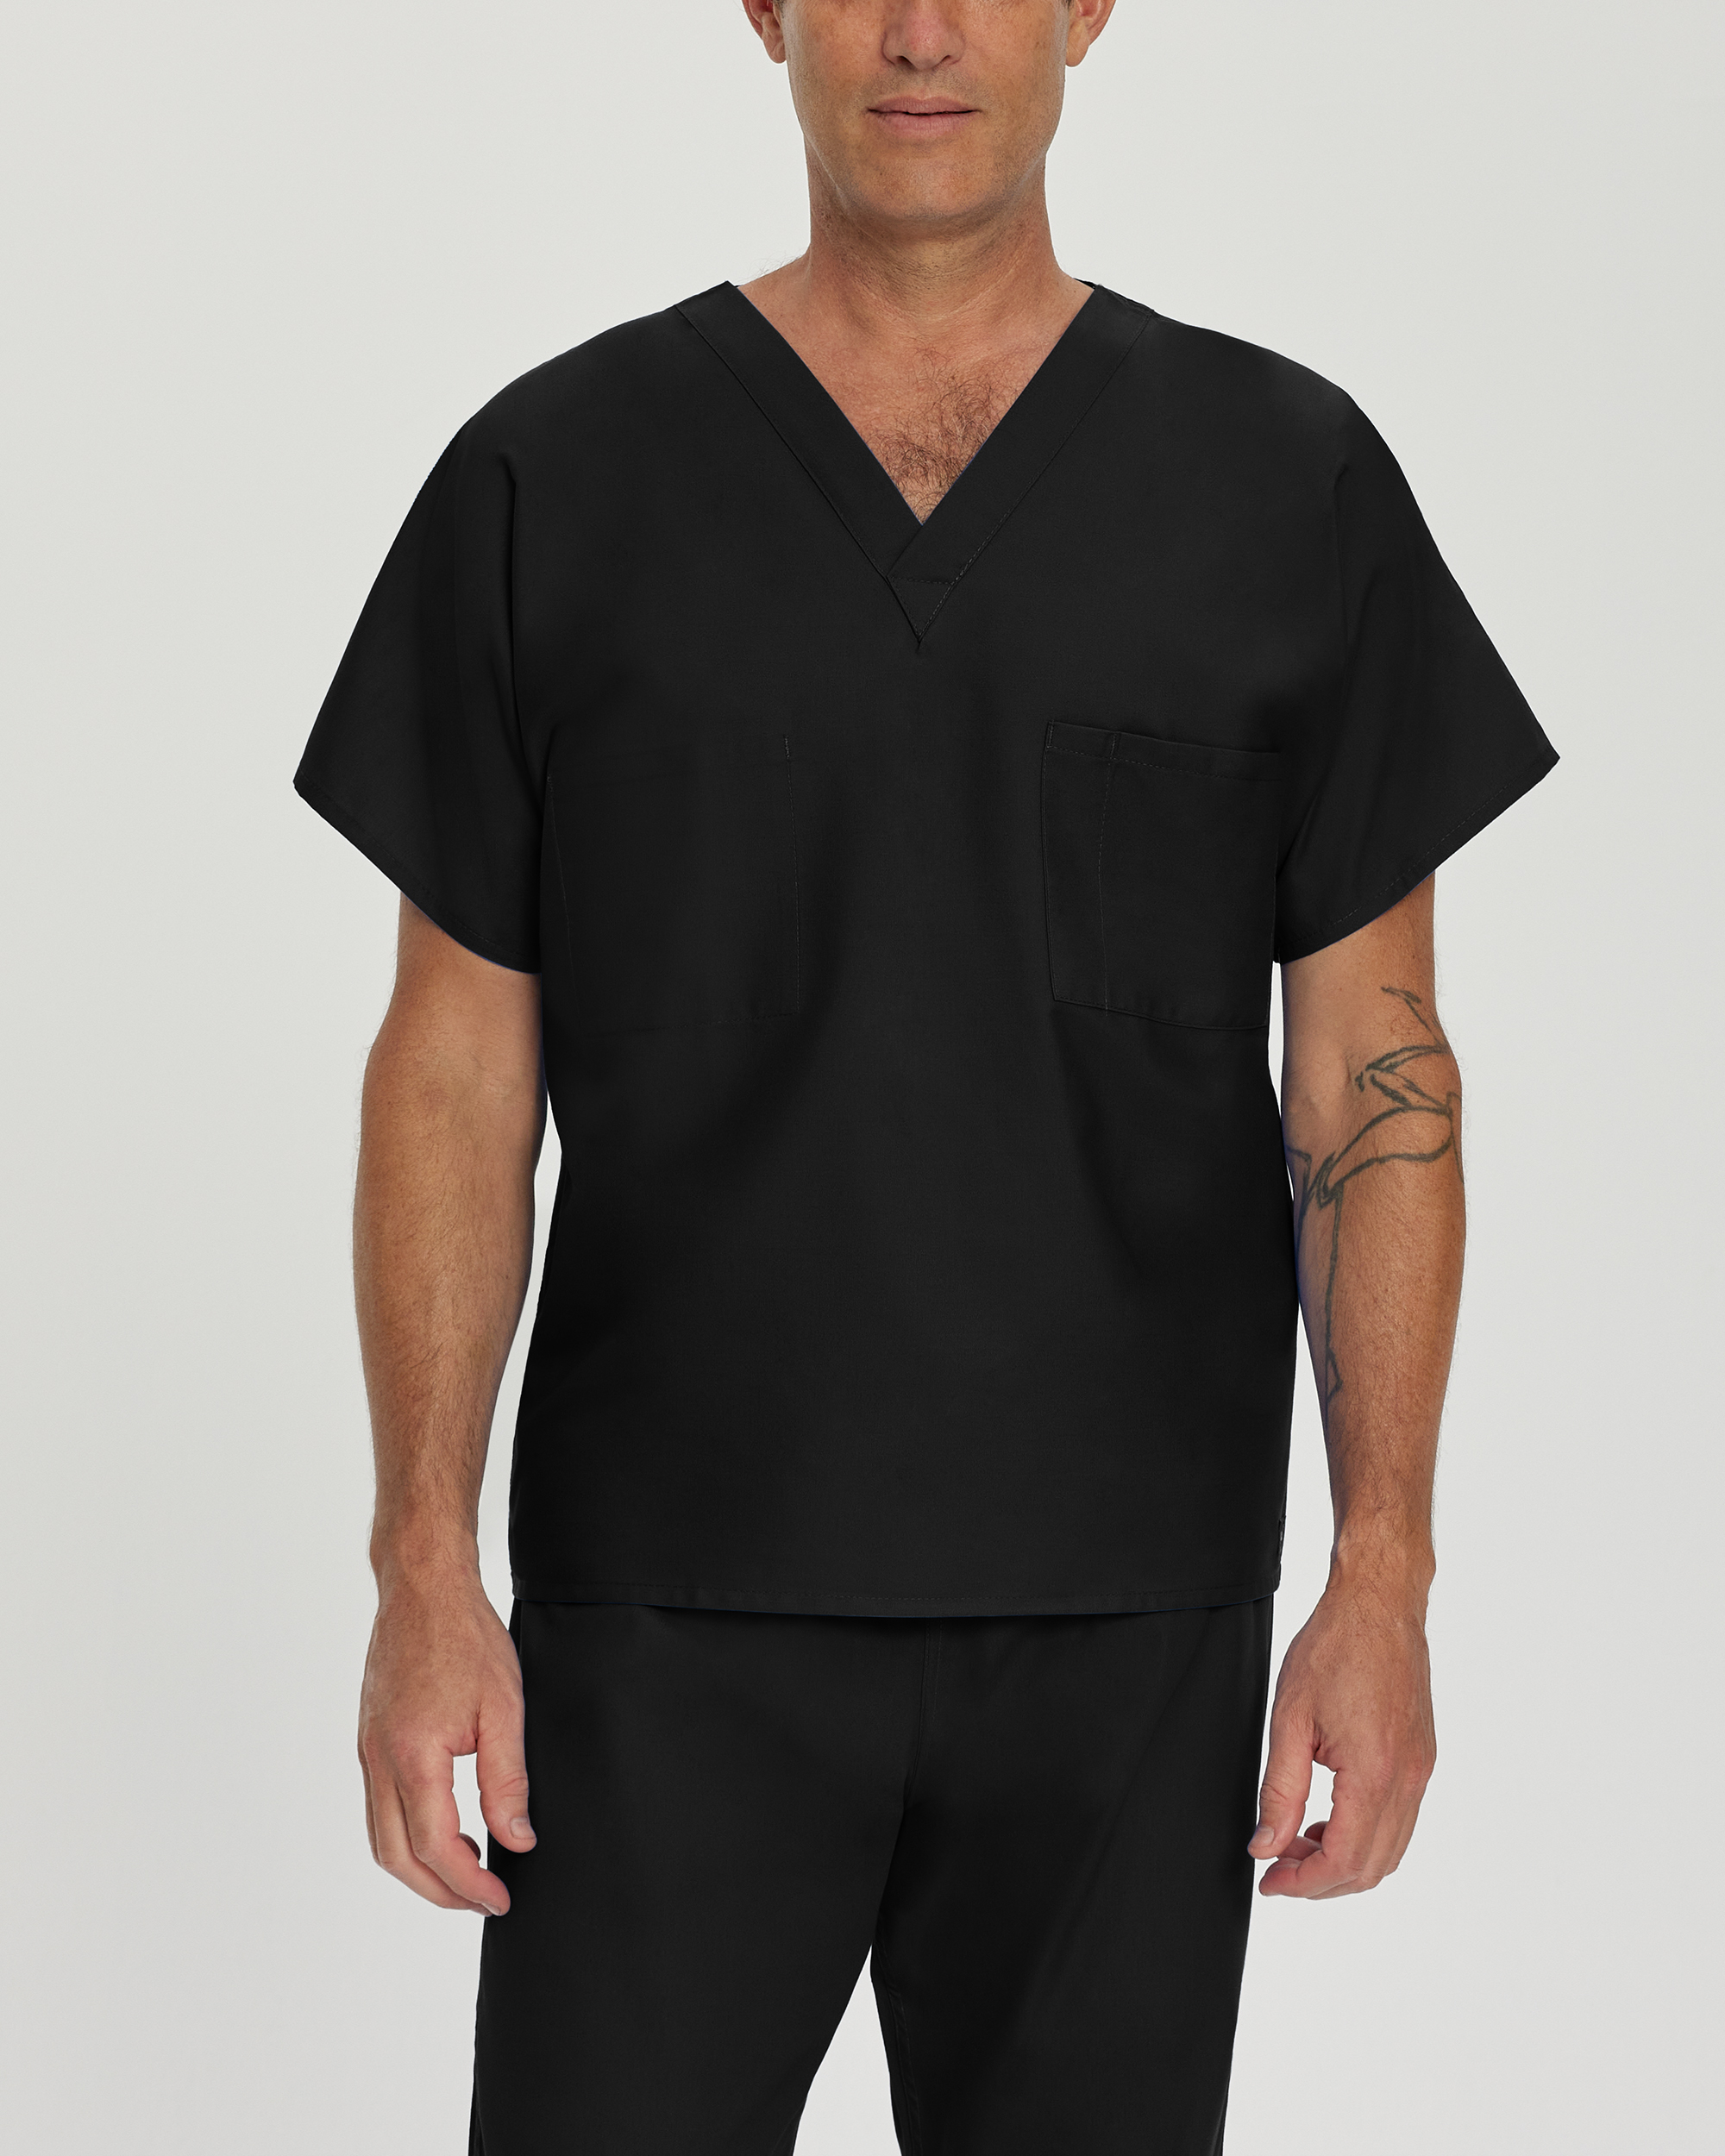 How convenient is the 1 pocket scrub top from Landau Scrubs for medical professionals?